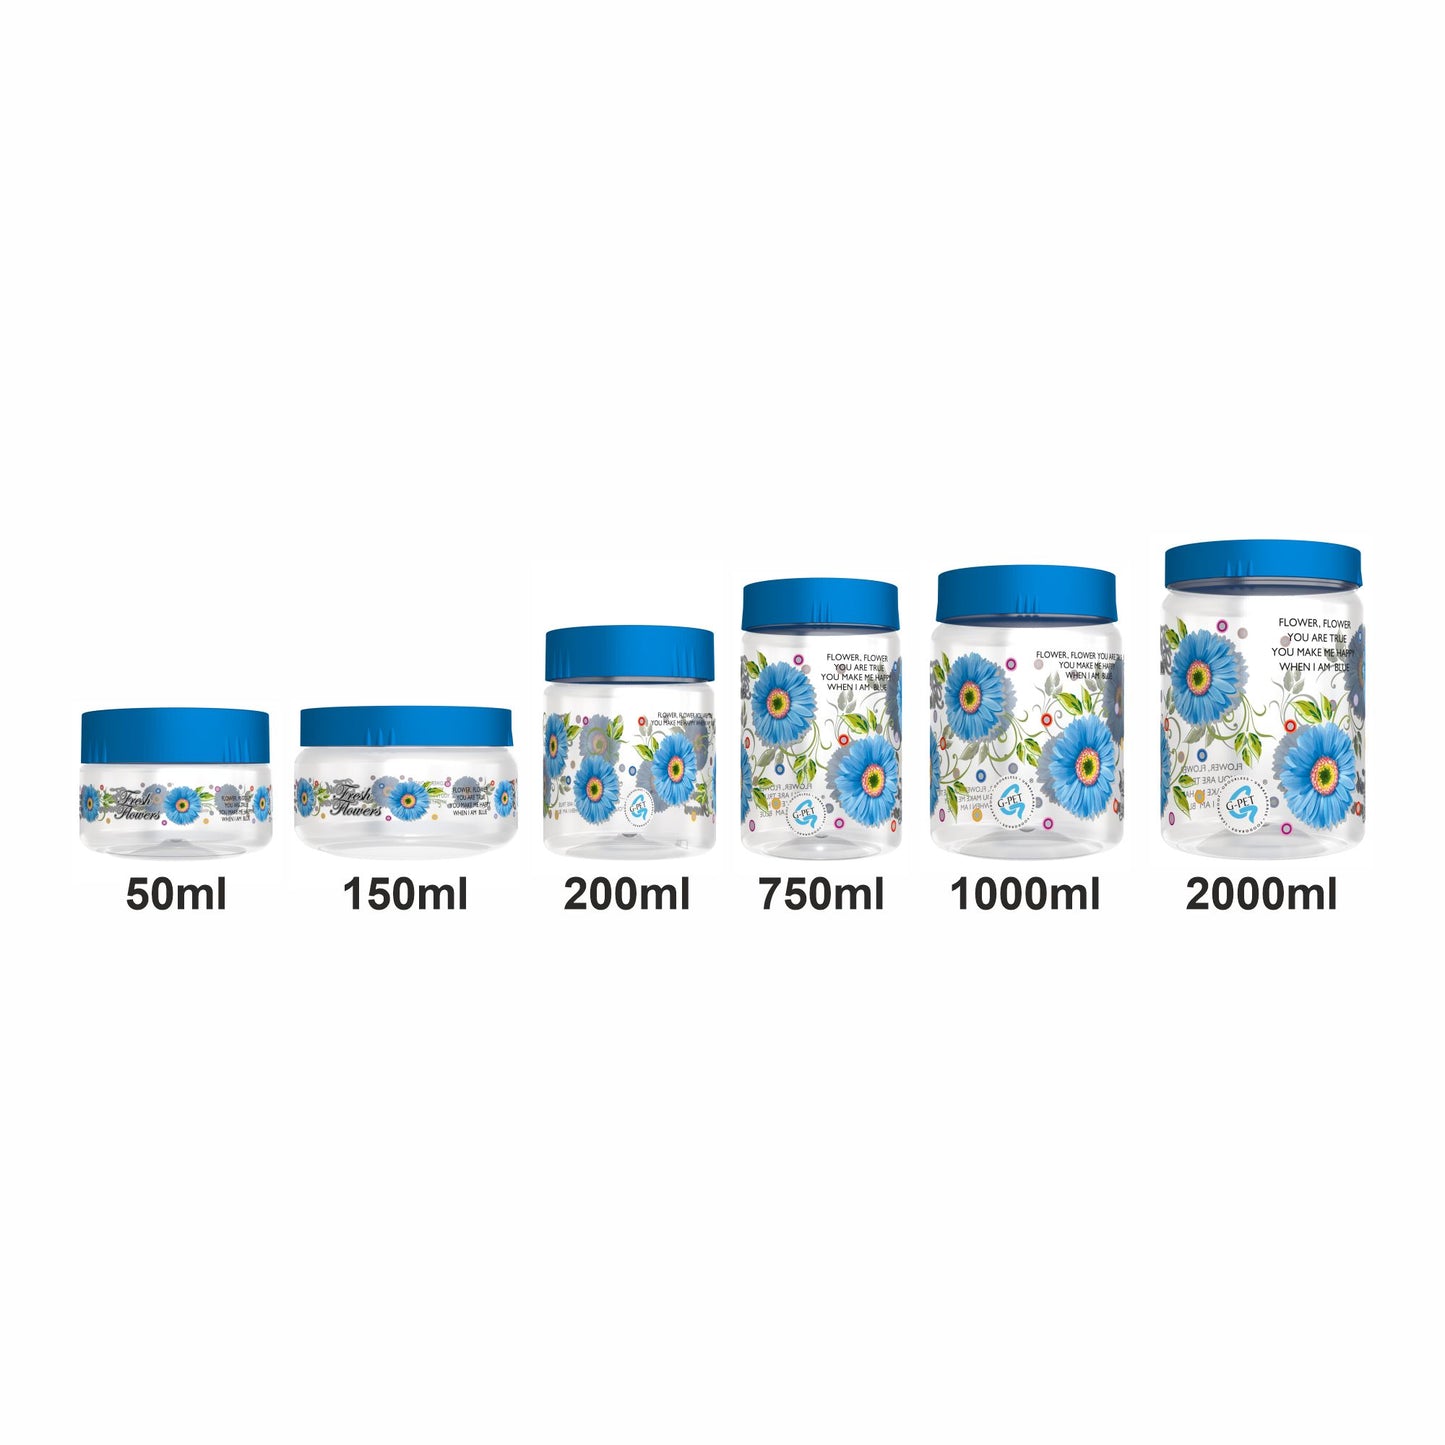 Print Magic Container Blue Pack of 18 - 2000ml (3 pcs), 1000ml (3 pcs), 750ml (3 pcs), 200ml (3 pcs), 150ml (3 pcs), 50ml (3 pcs) Plastic Grocery Container